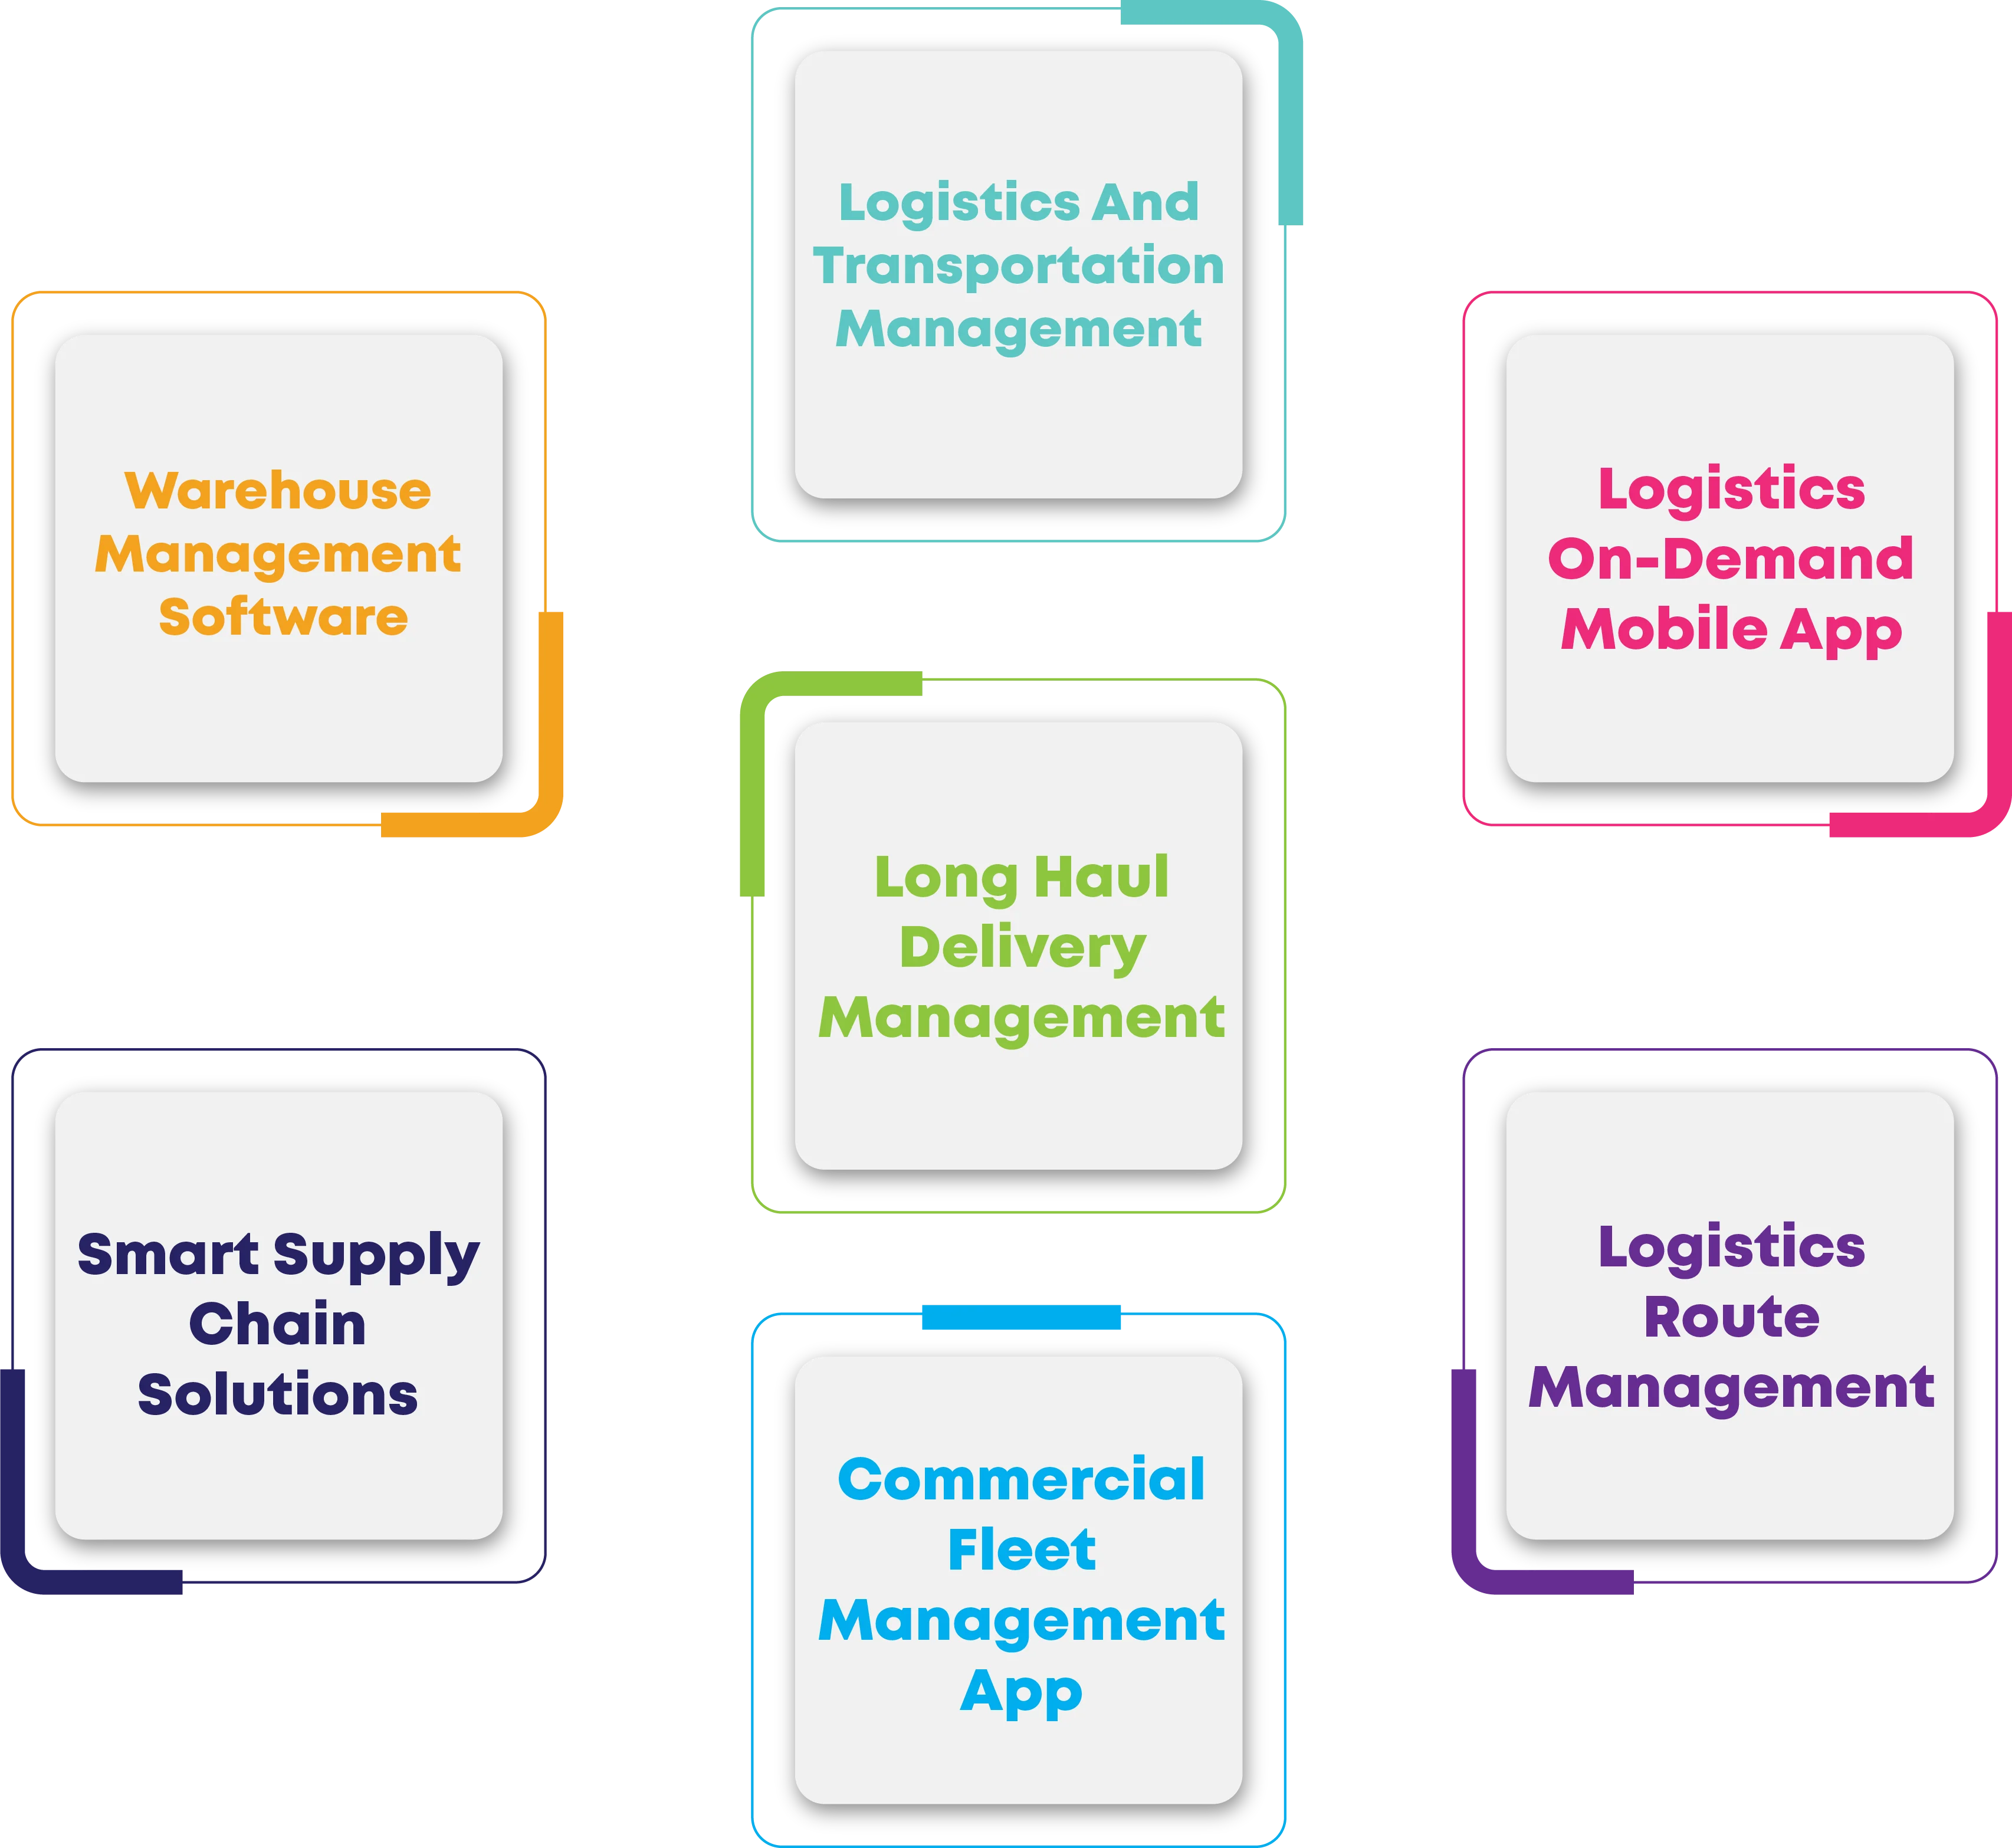 OUR END-TO-END LOGISTICS & DISTRIBUTION SOLUTIONS